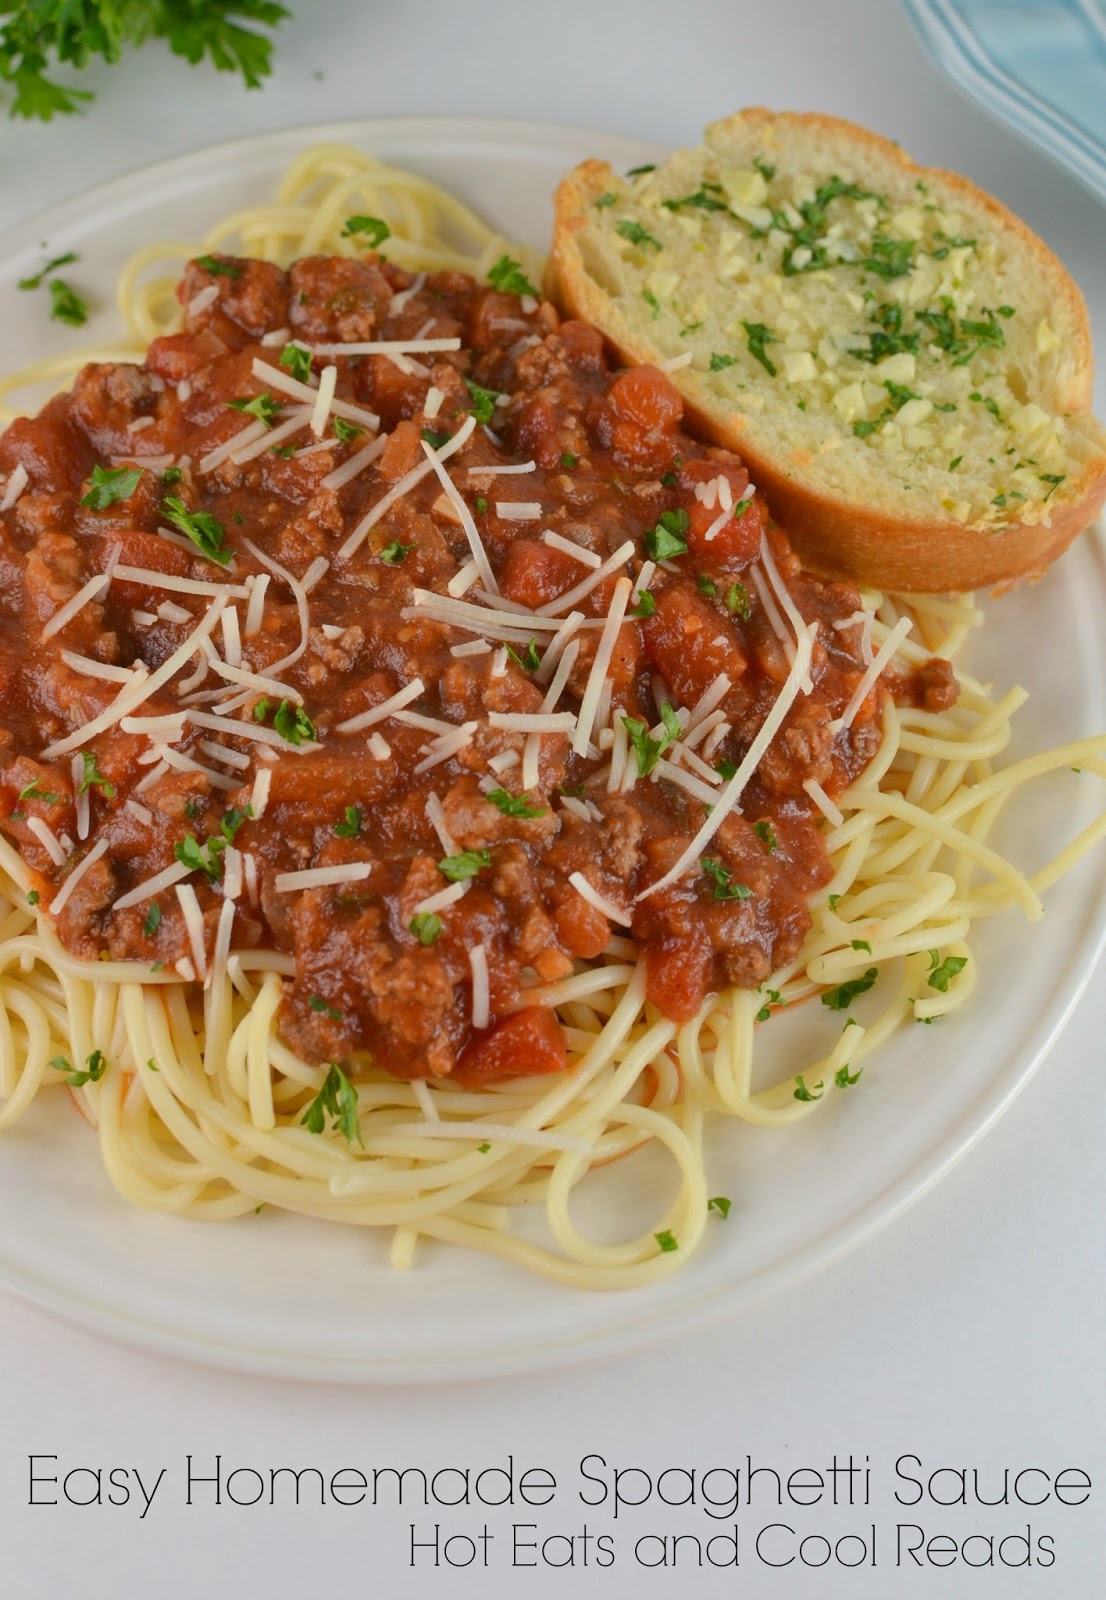 Hot Eats and Cool Reads: Easy Homemade Spaghetti Sauce Recipe